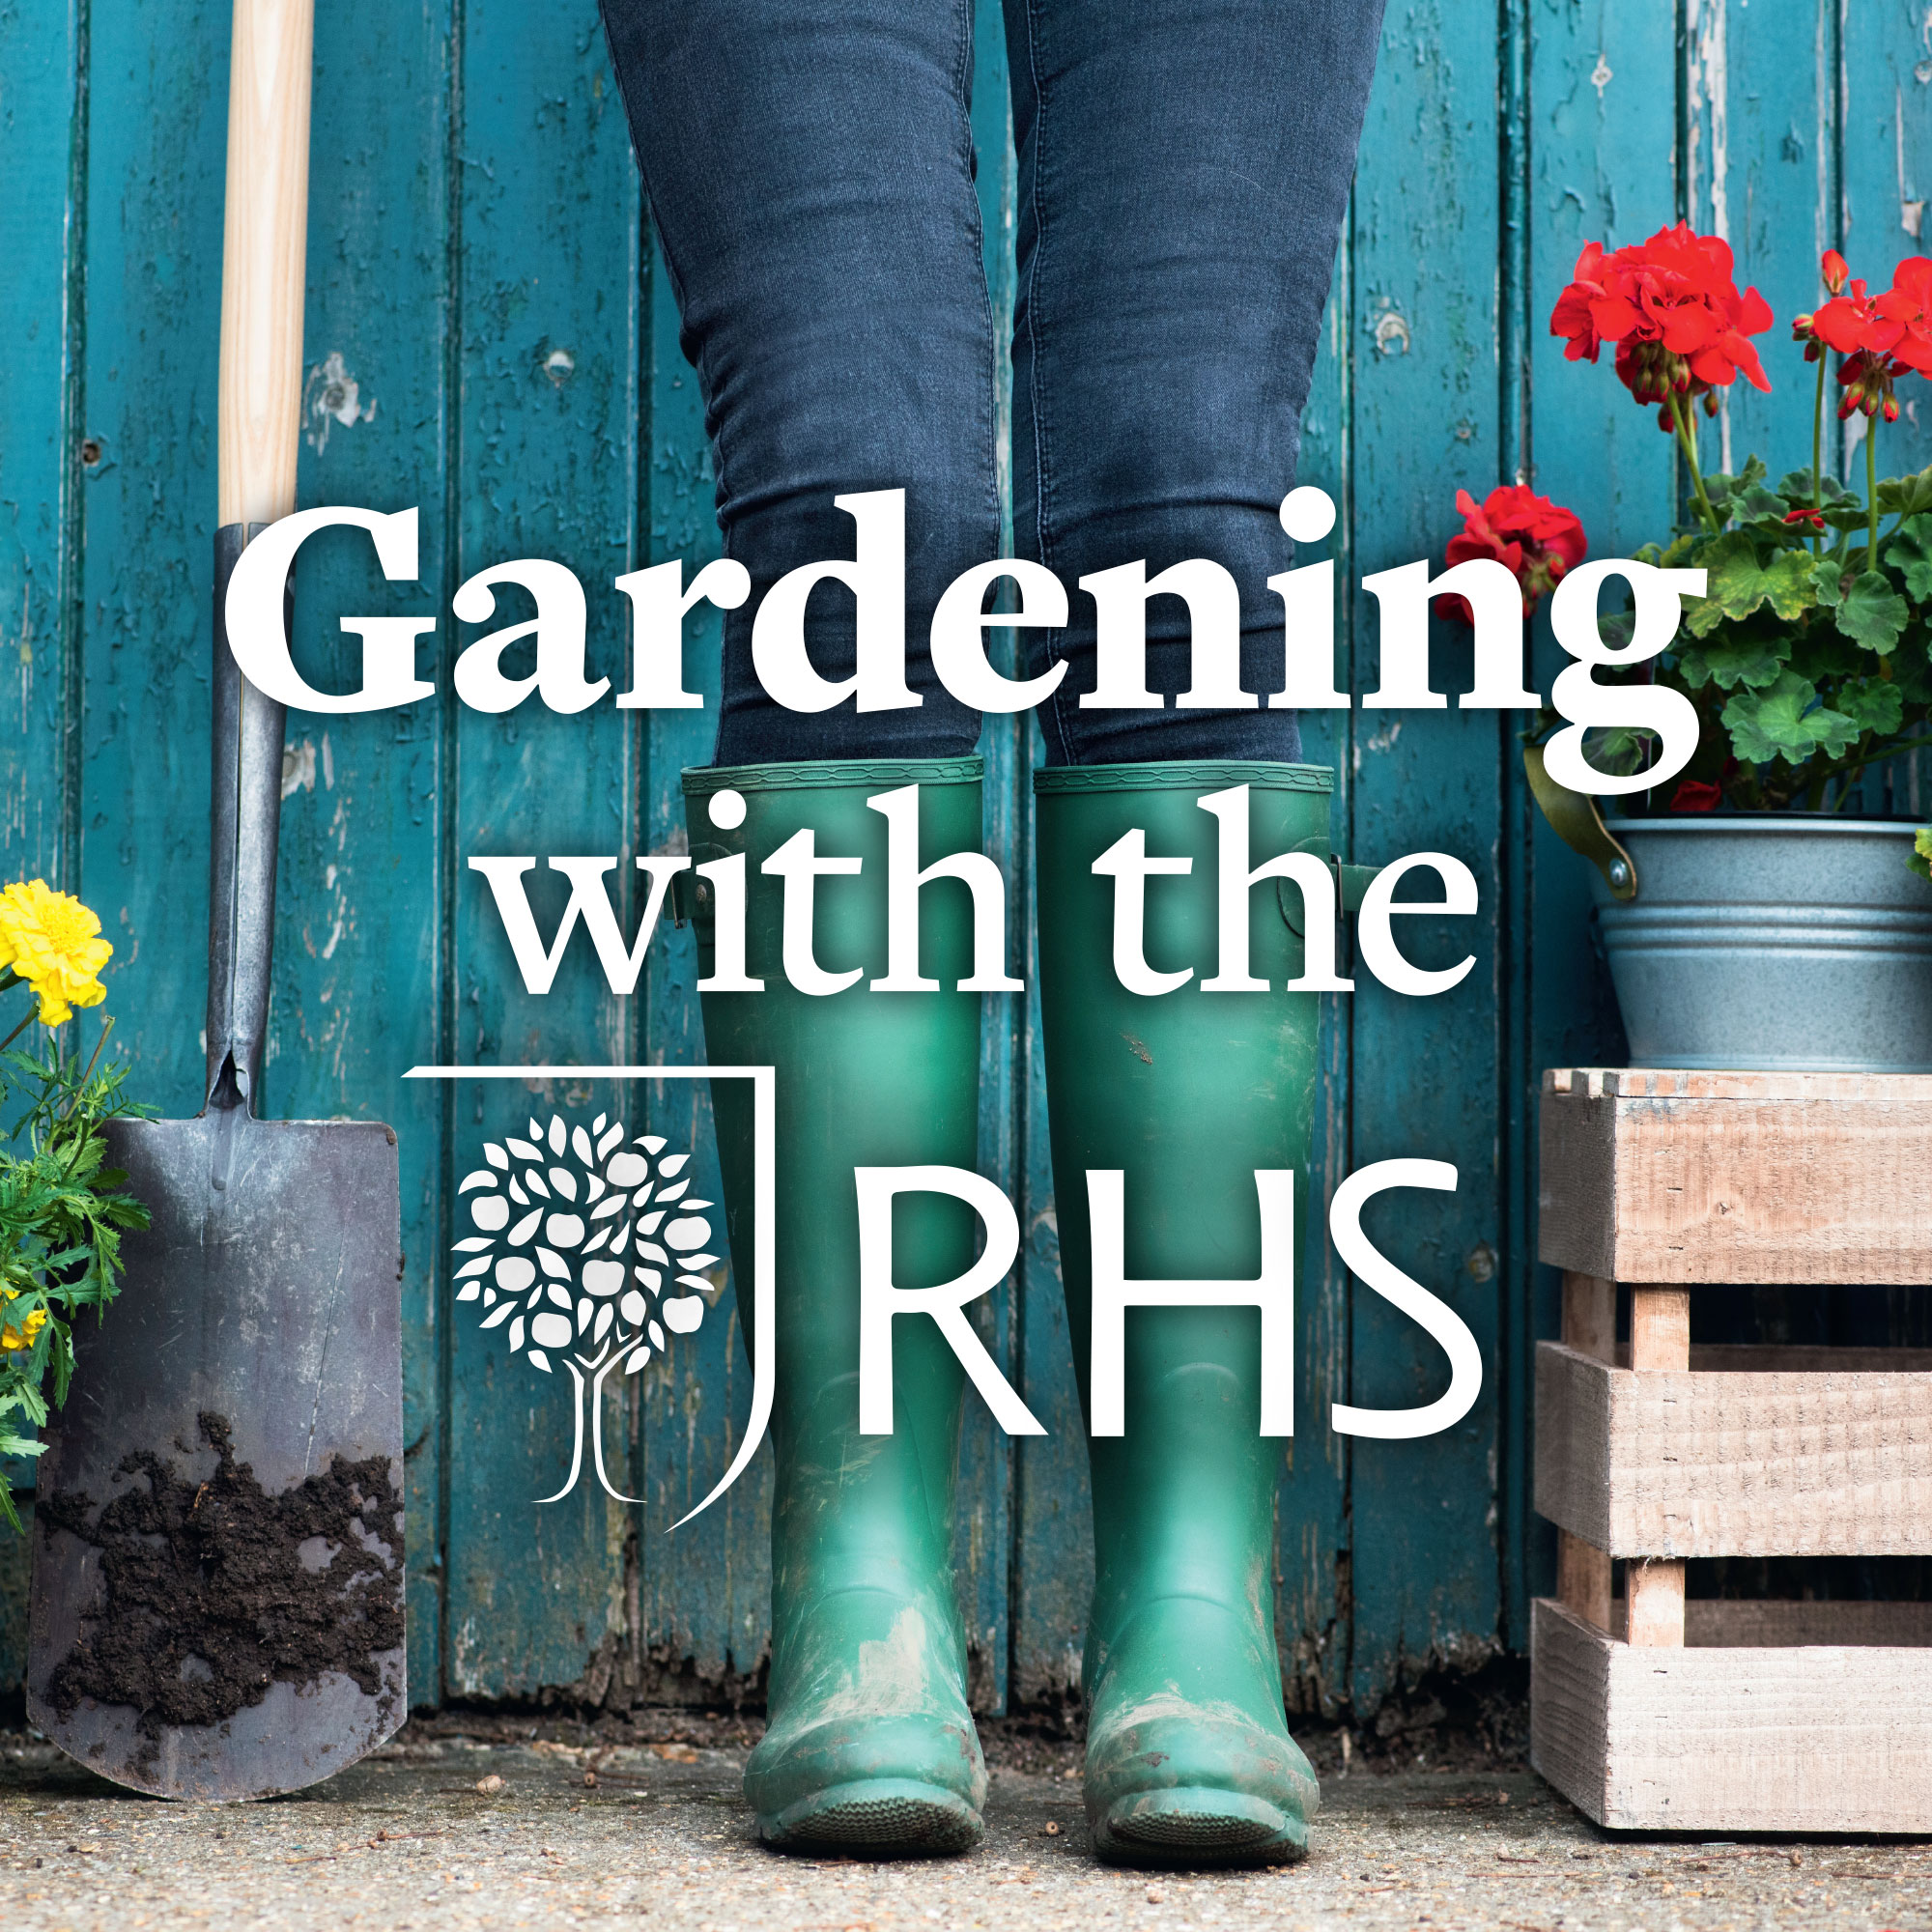 Gardening with the RHS:Royal Horticultural Society